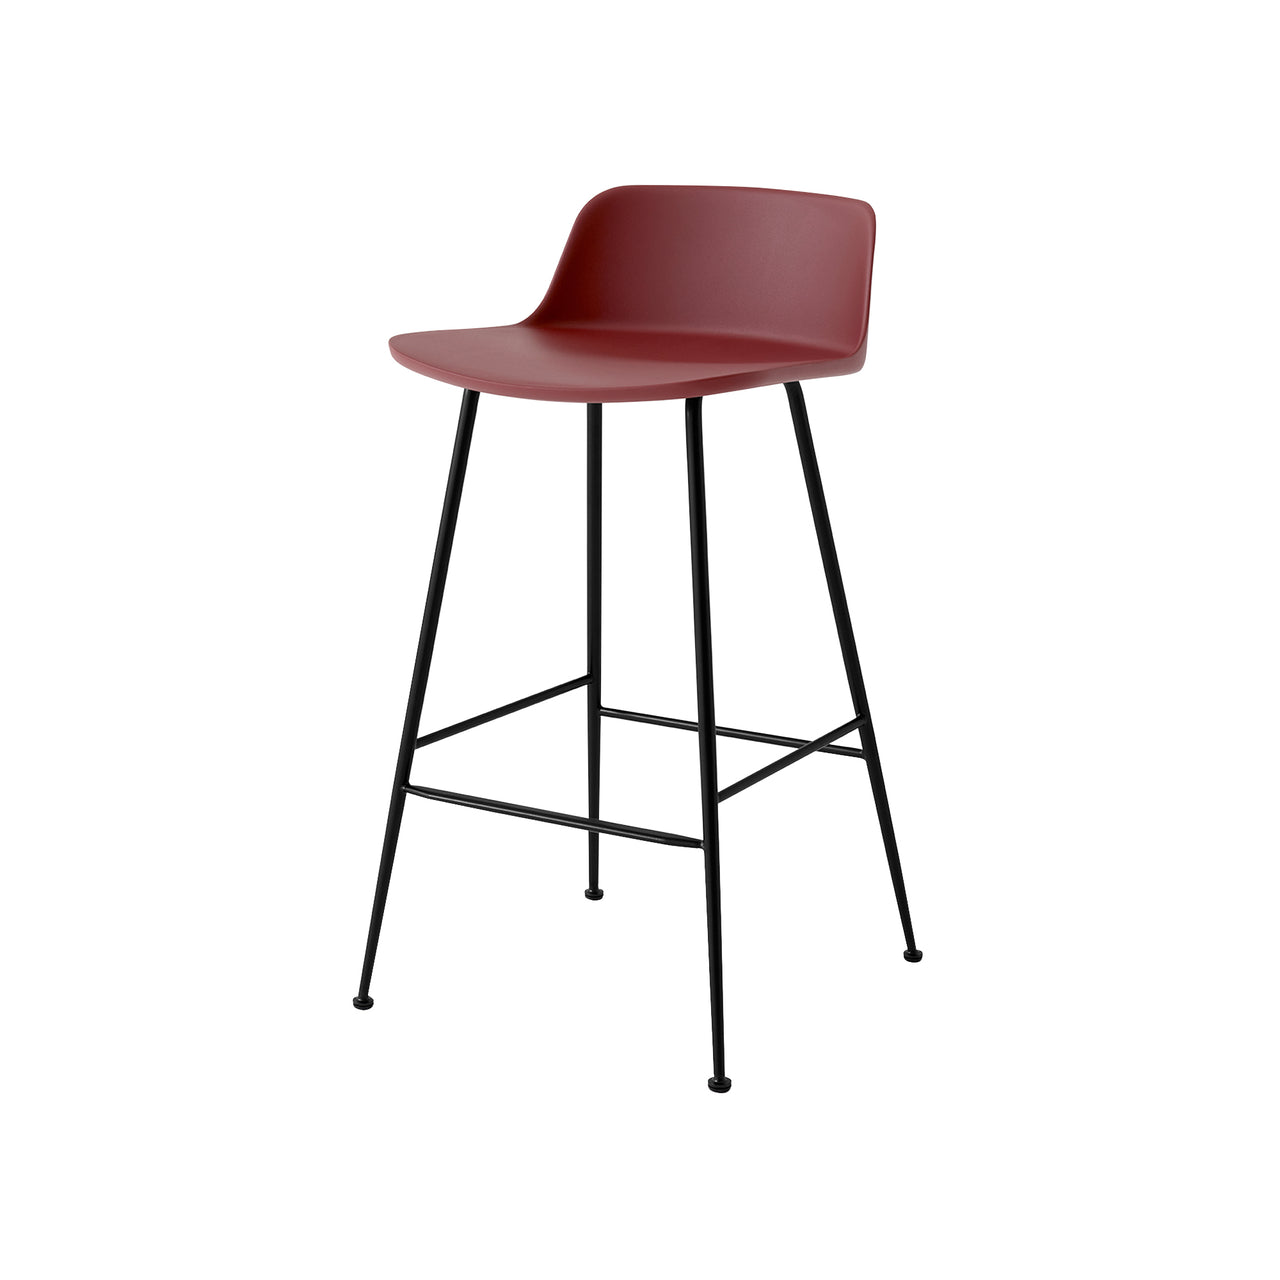 Rely Bar + Counter Lowback Stool: HW81 + HW86 + Counter (HW81) + Red Brown + Black